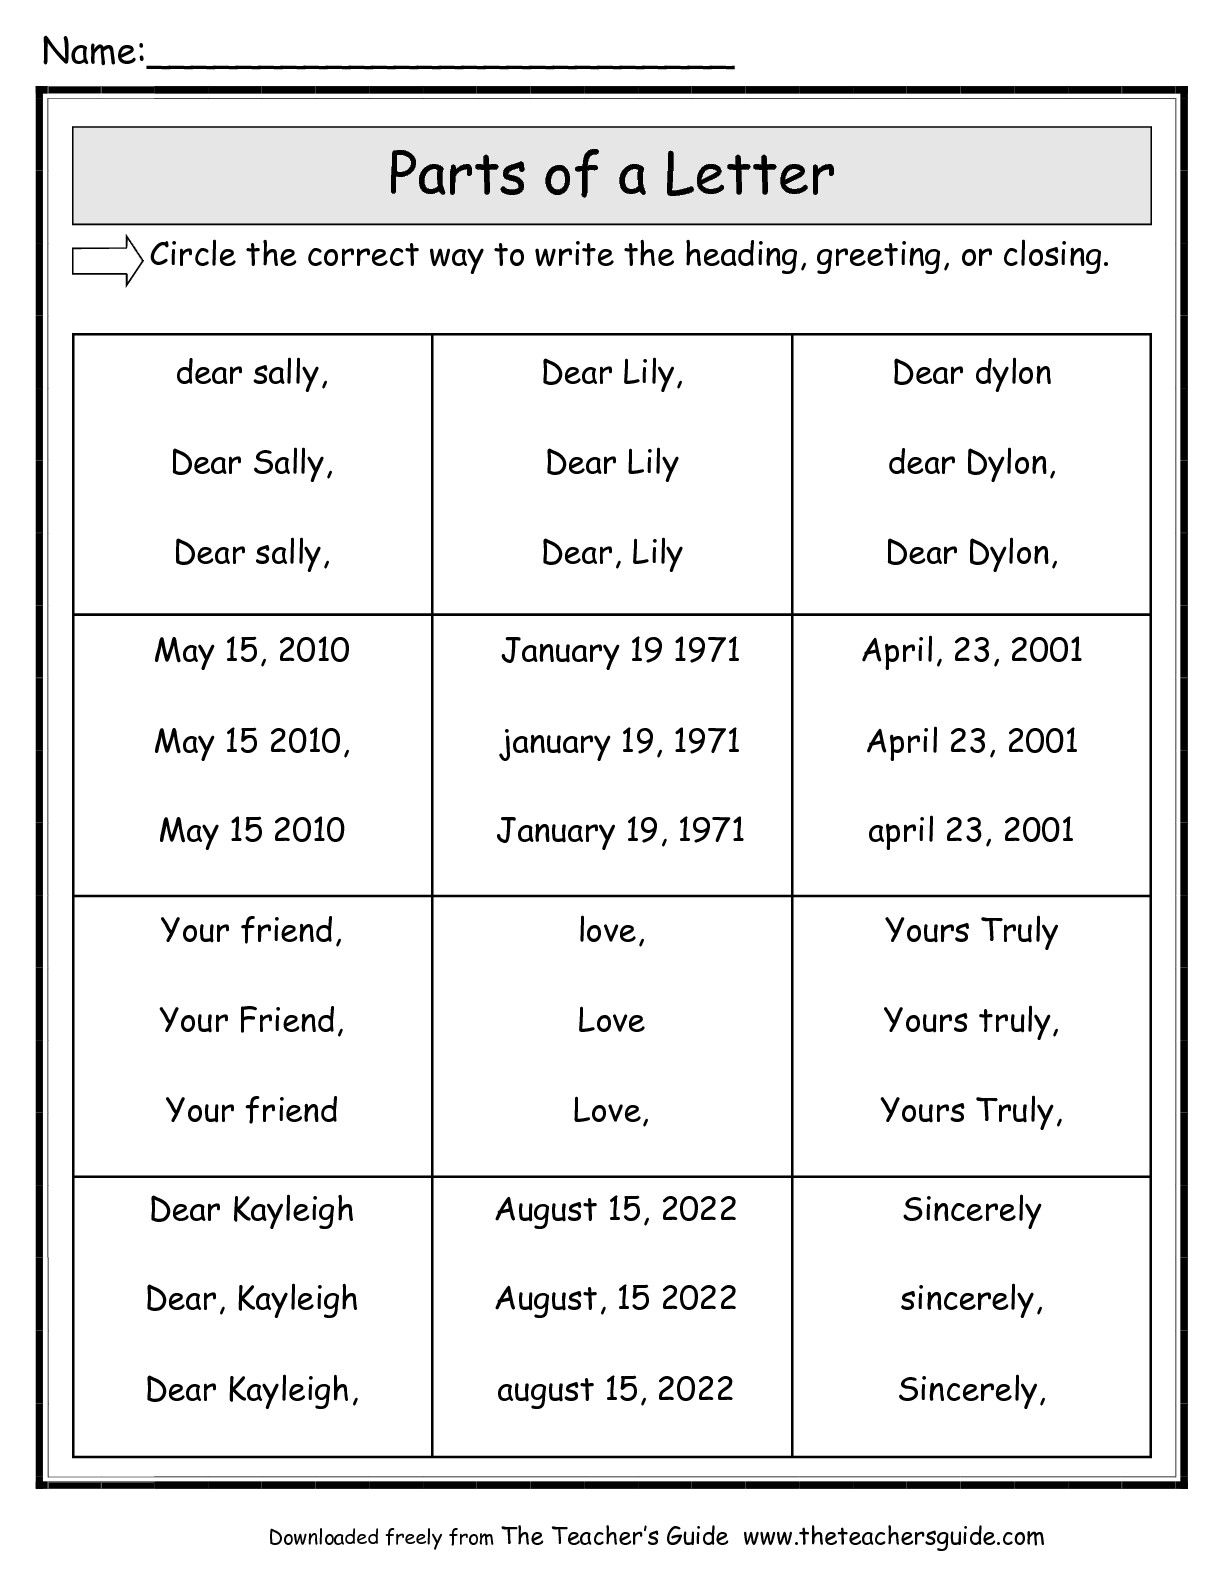 Friendly Letter Worksheets From The Teacher S Guide Letter Writing Activities Friendly Letter Writing Teaching Writing